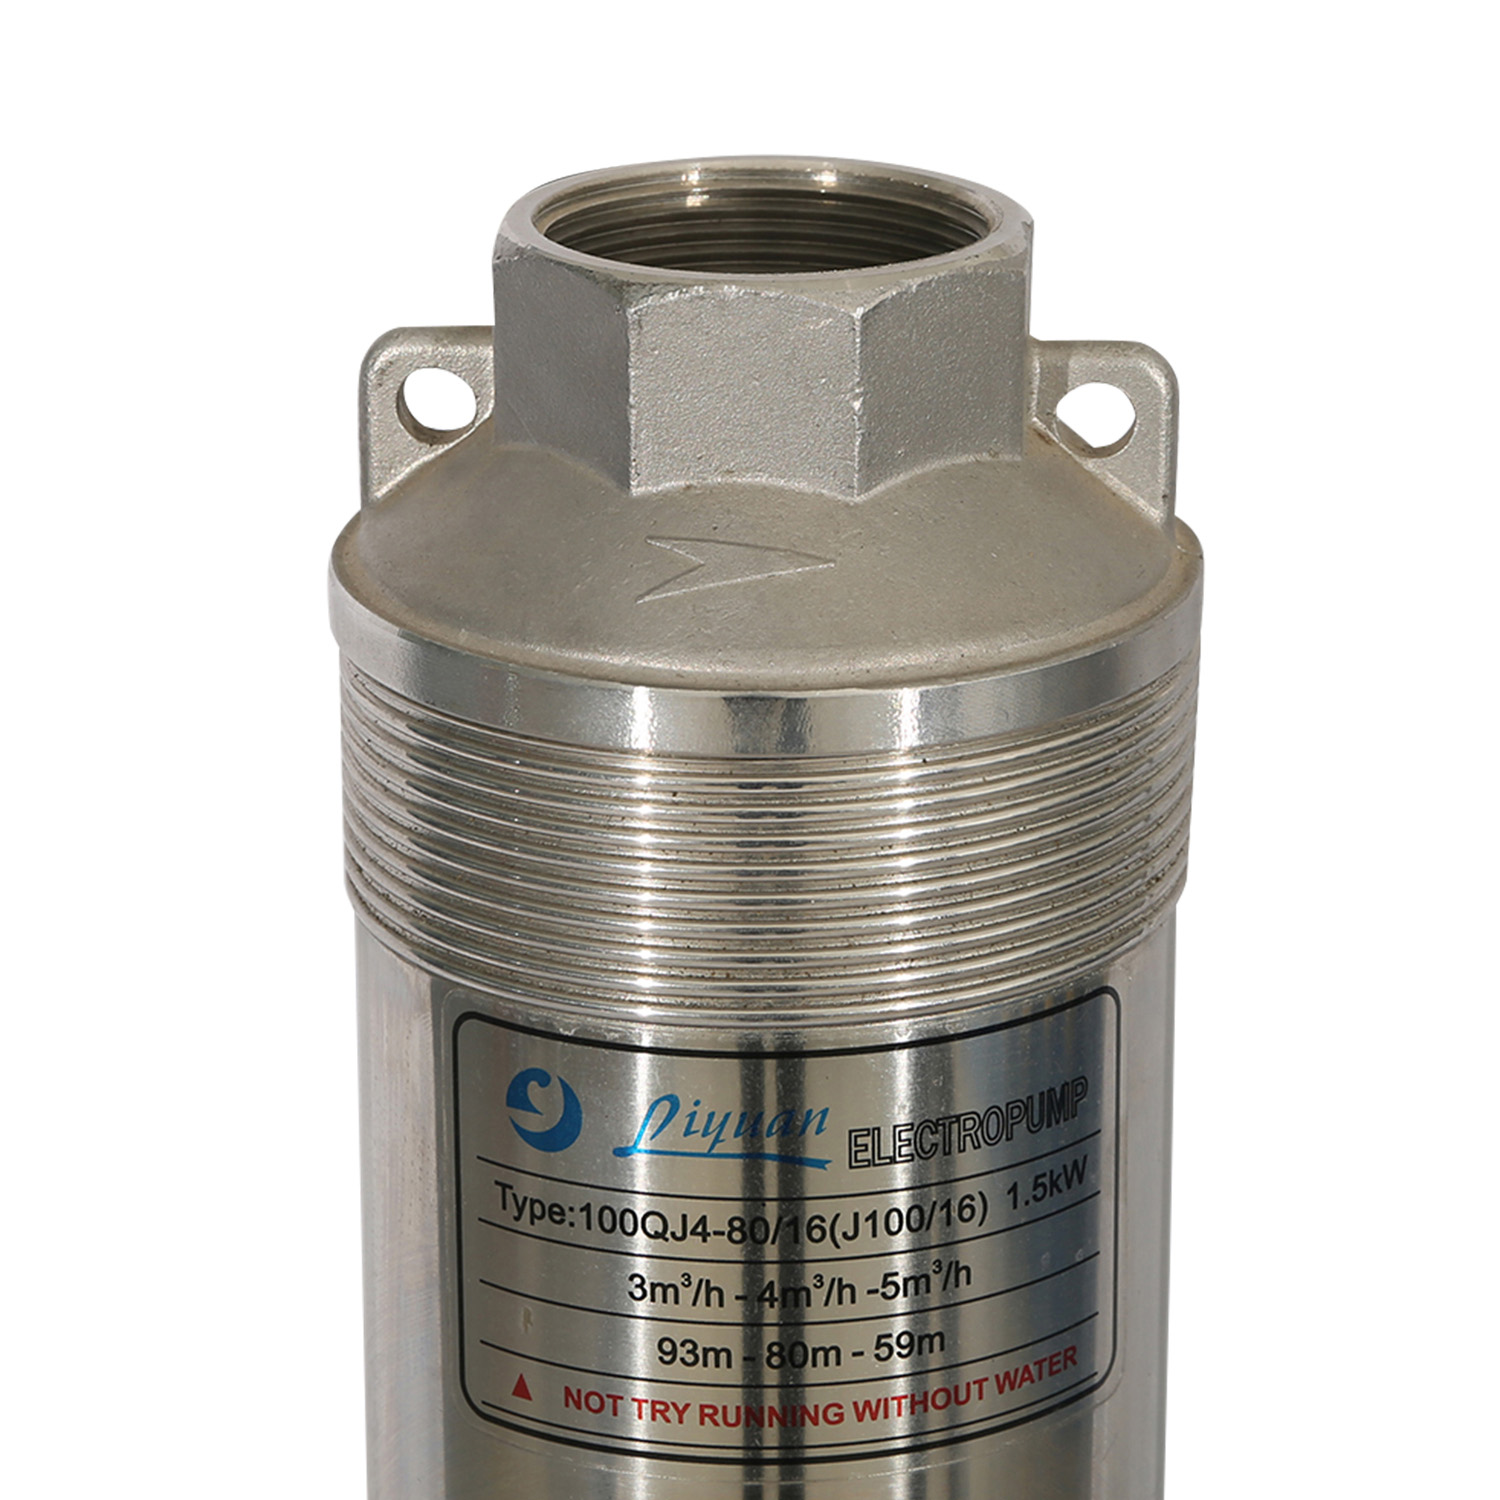 304/316/316L Deep Well Electric Deep Well 4Kw Stainless Steel Submersible Pump Price 12/16/20m3/h ATA